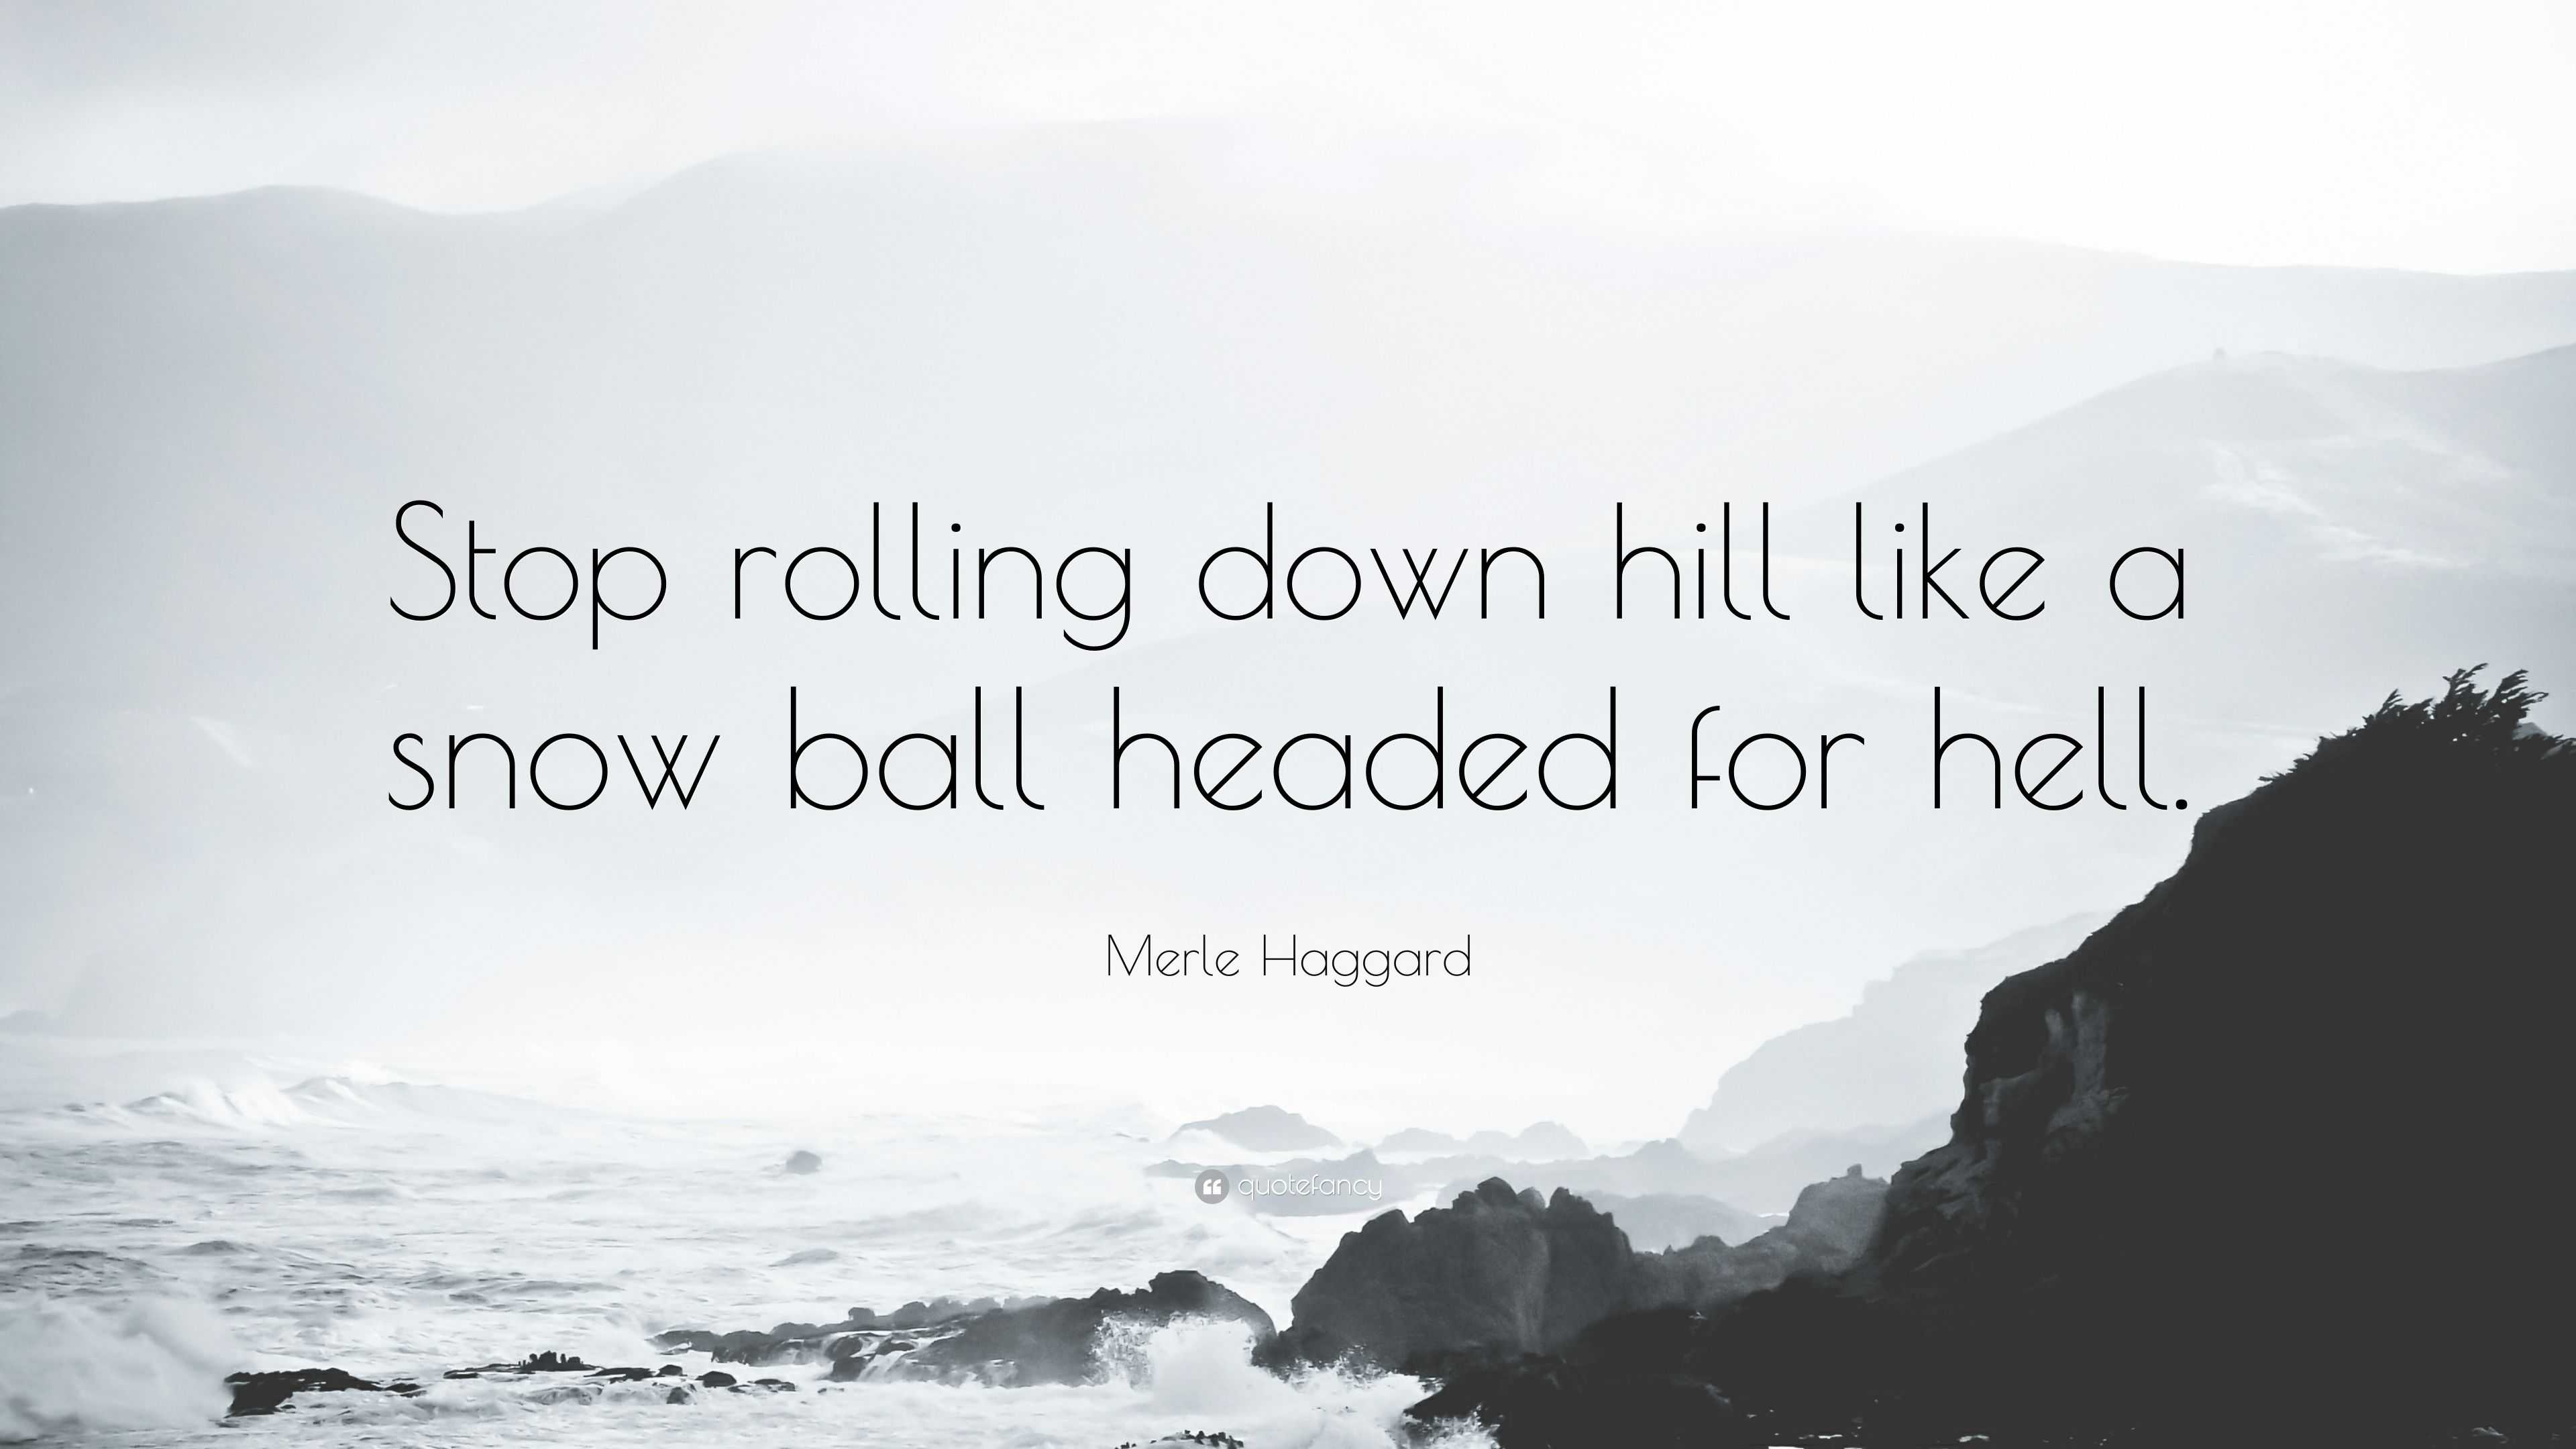 2191059-Merle-Haggard-Quote-Stop-rolling-down-hill-like-a-snow-ball-headed.jpg